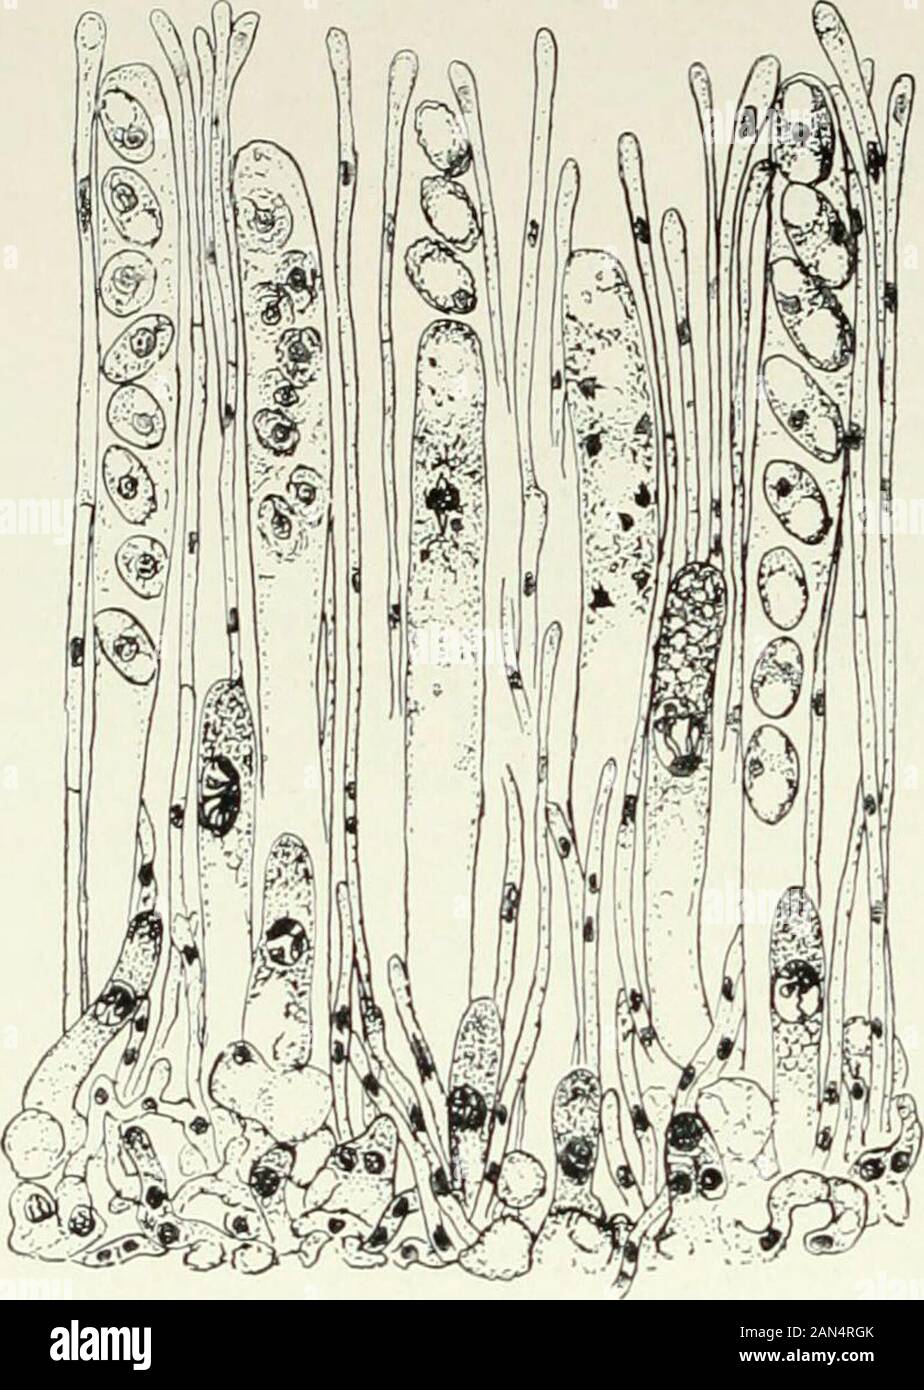 Fungi, Ascomycetes, Ustilaginales, Uredinales . her by an irregular tear or by dehiscencealong a definite line, and the spores are shot out in a jet of liquid while thedeflated ascus sinks back to about half its size (figs. 4, 5). In forms with anexplosive mechanism the ascus often elongates considerably during the latterpart of its development; the spores are arranged at the upper end and eitherfloat suspended in the fluid contents of the ascus, or are attached to theapex and to one another by cytoplasmic strands (Sordaria, Podospora,fig. 2 e). The explosive ejection of spores from different Stock Photo